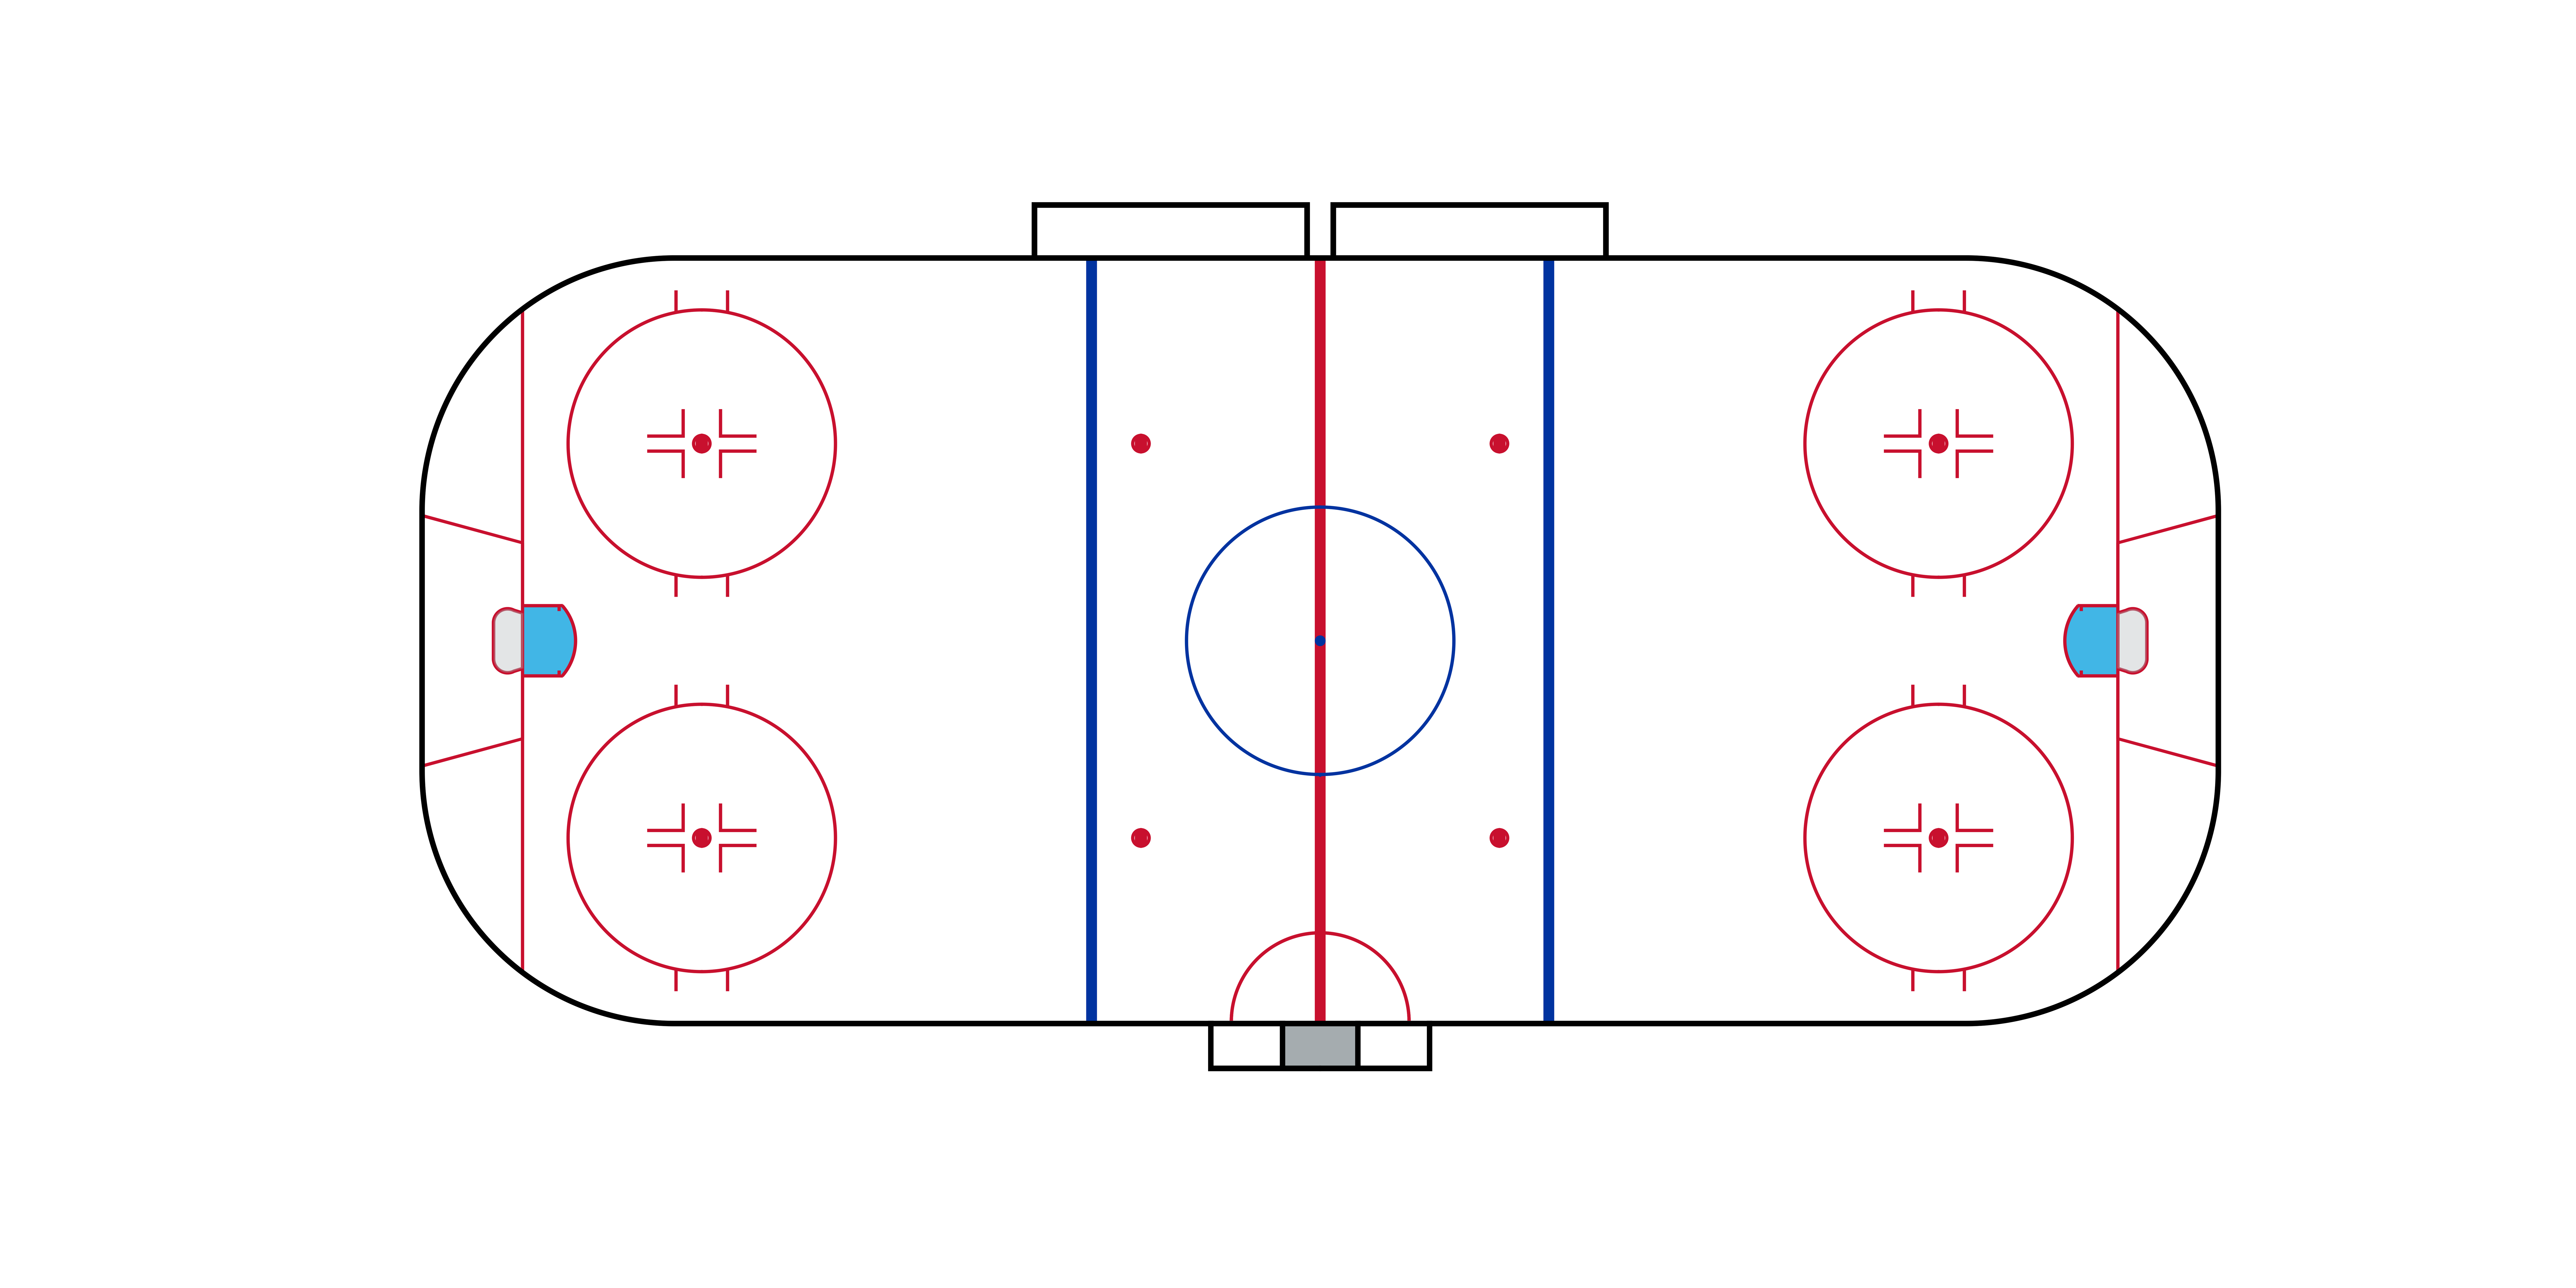 Full NHL rink output from sportypy